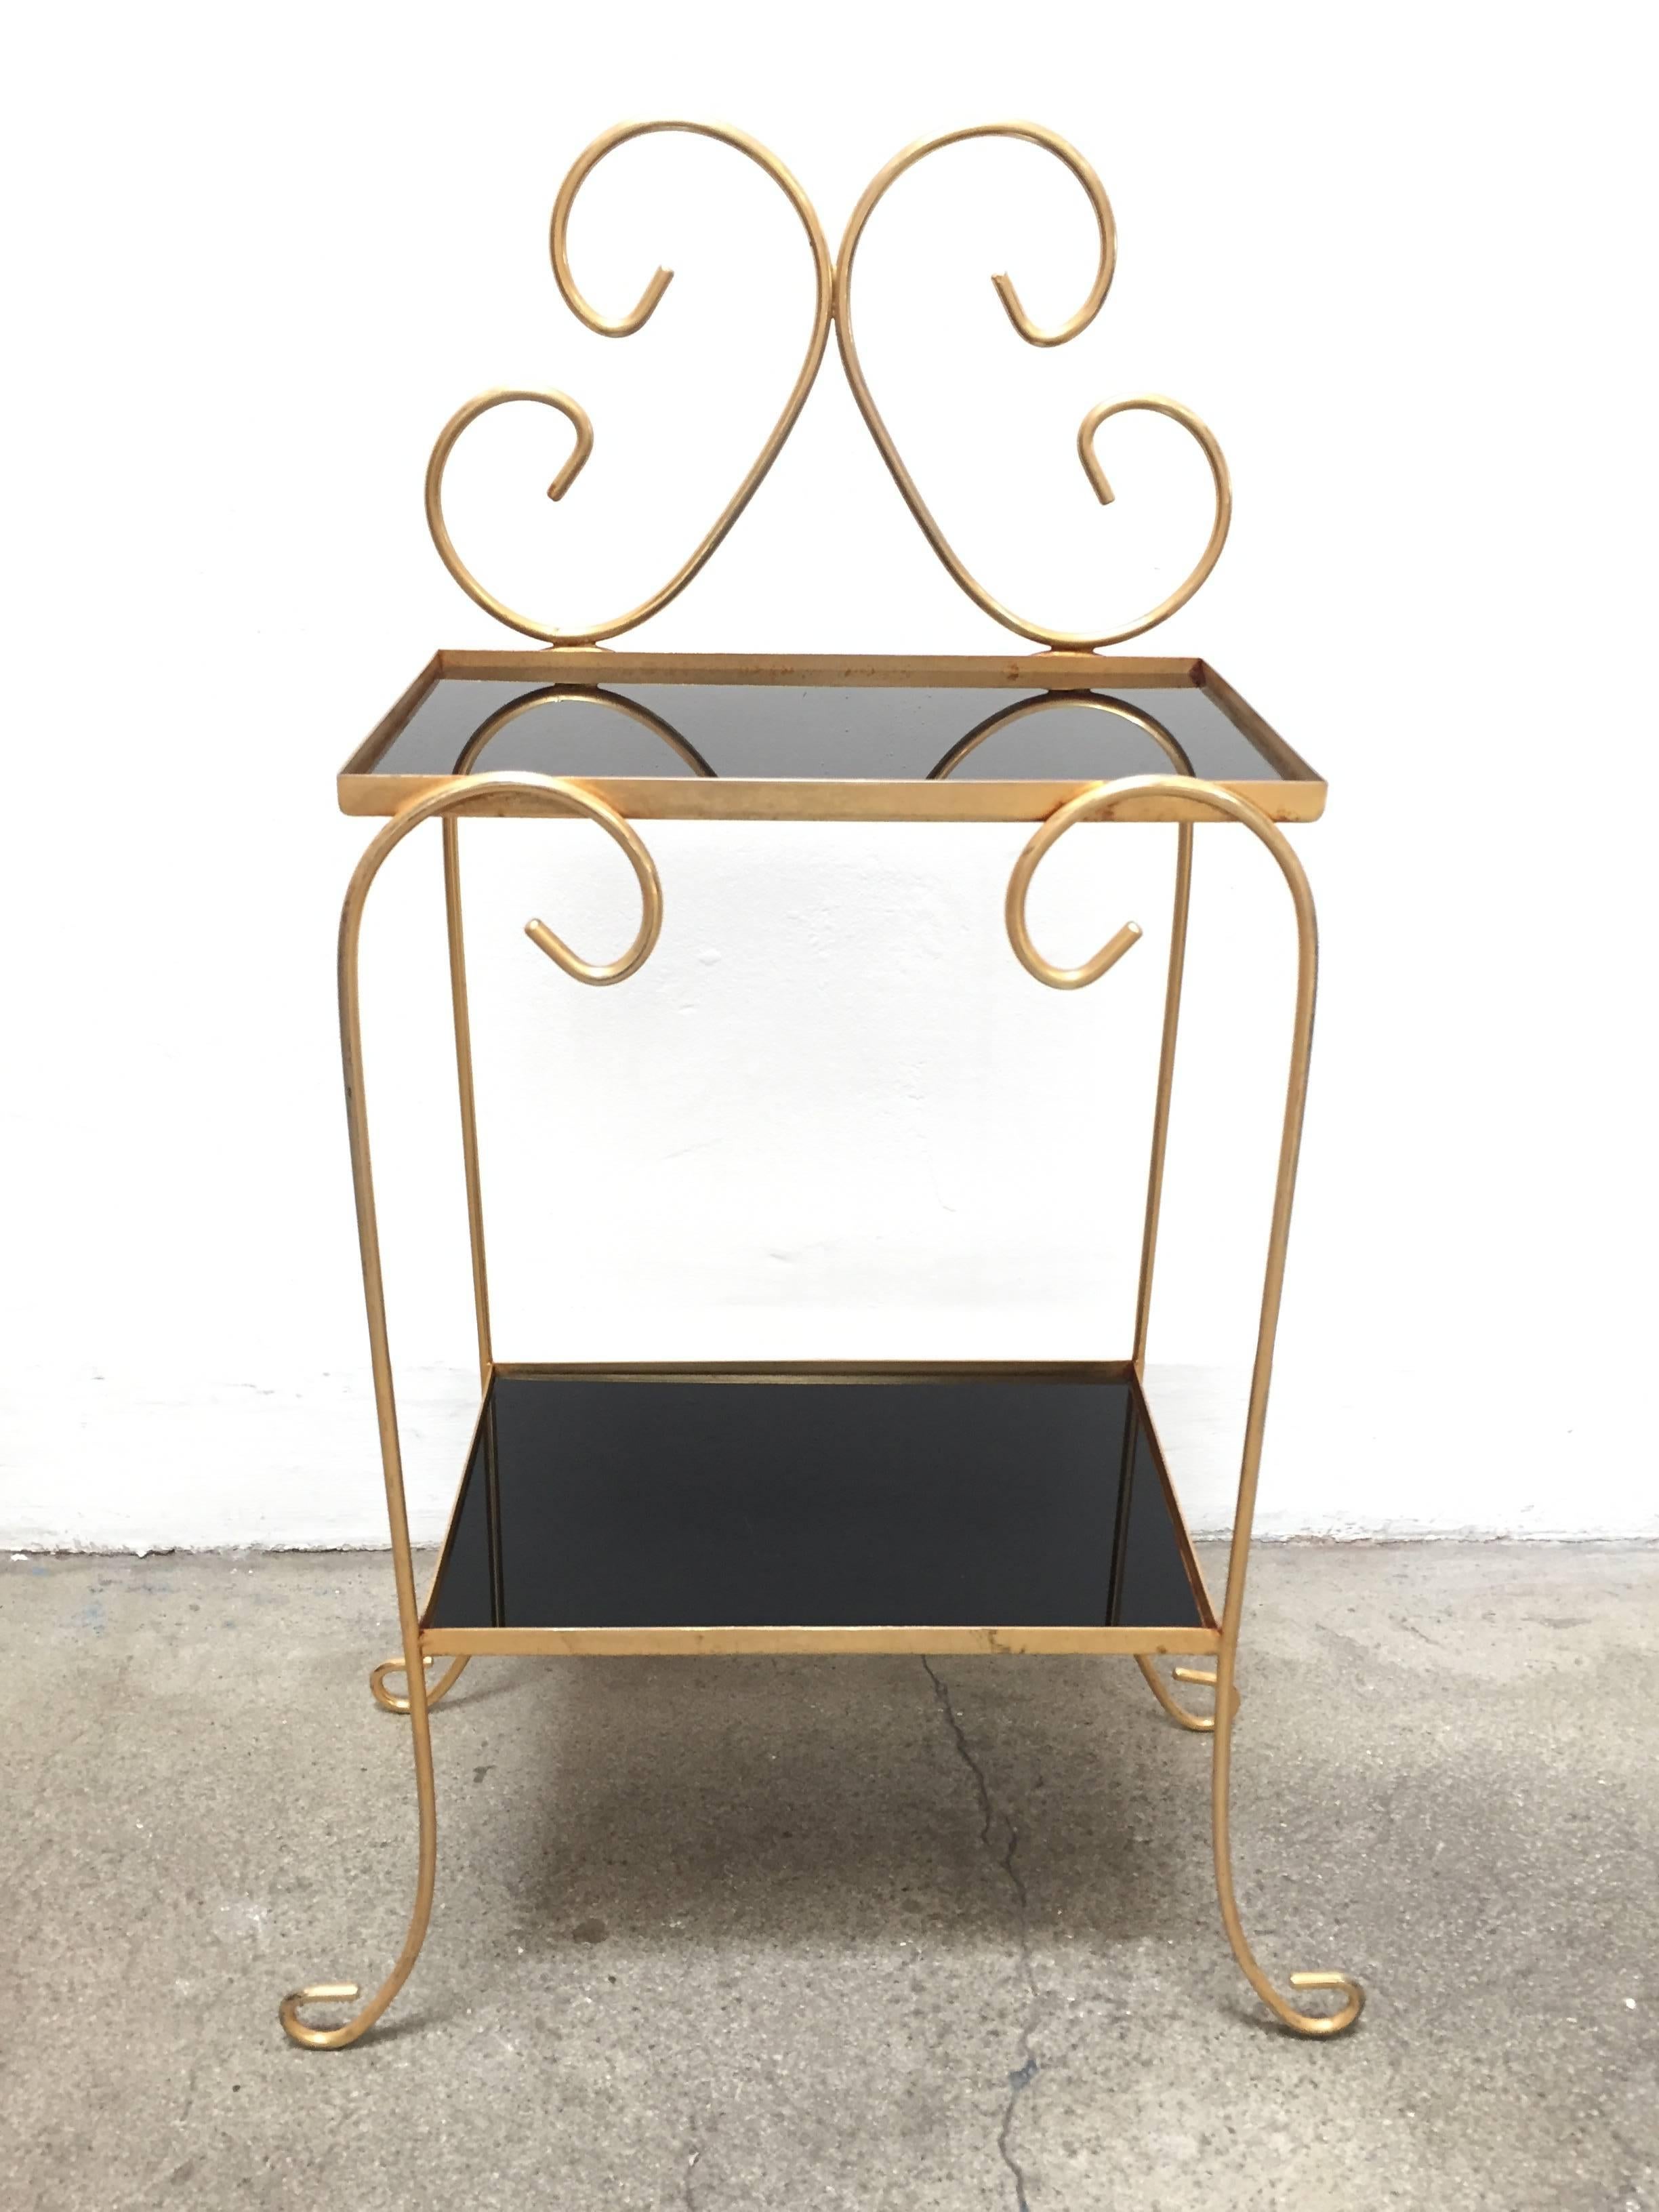 A fine French gilt iron side table with two-tier inset black mirrored glass.
Elegant gilt iron side table with curved iron legs and top decorative iron scrolls.
Maison Jansen style made in France.
Small side table.
Measure: Total height is 30.5